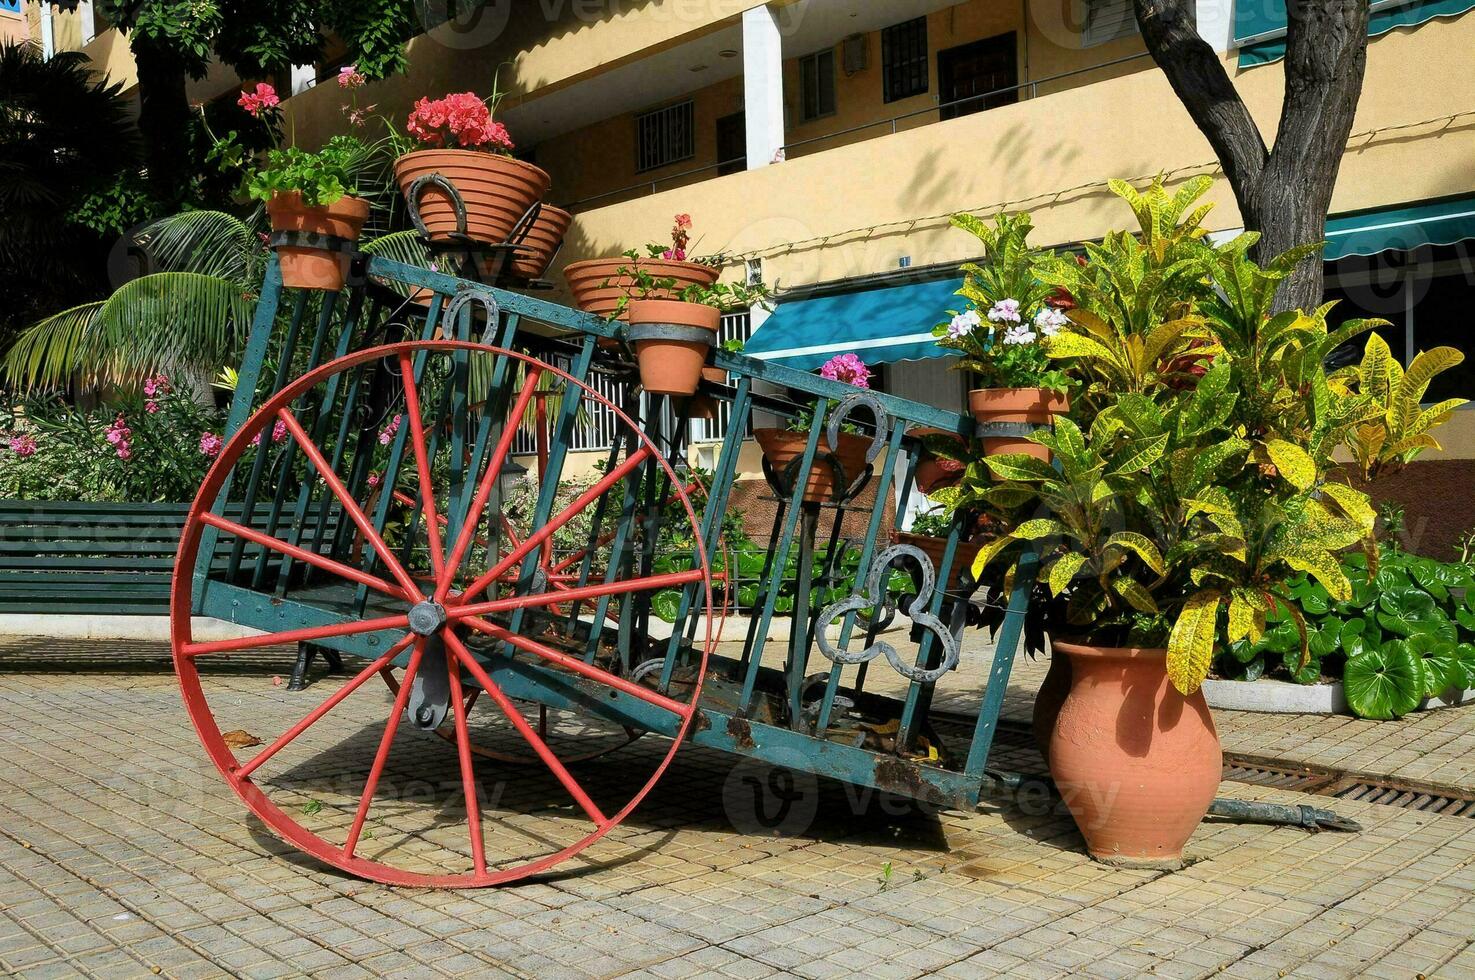 A cart with flowers photo